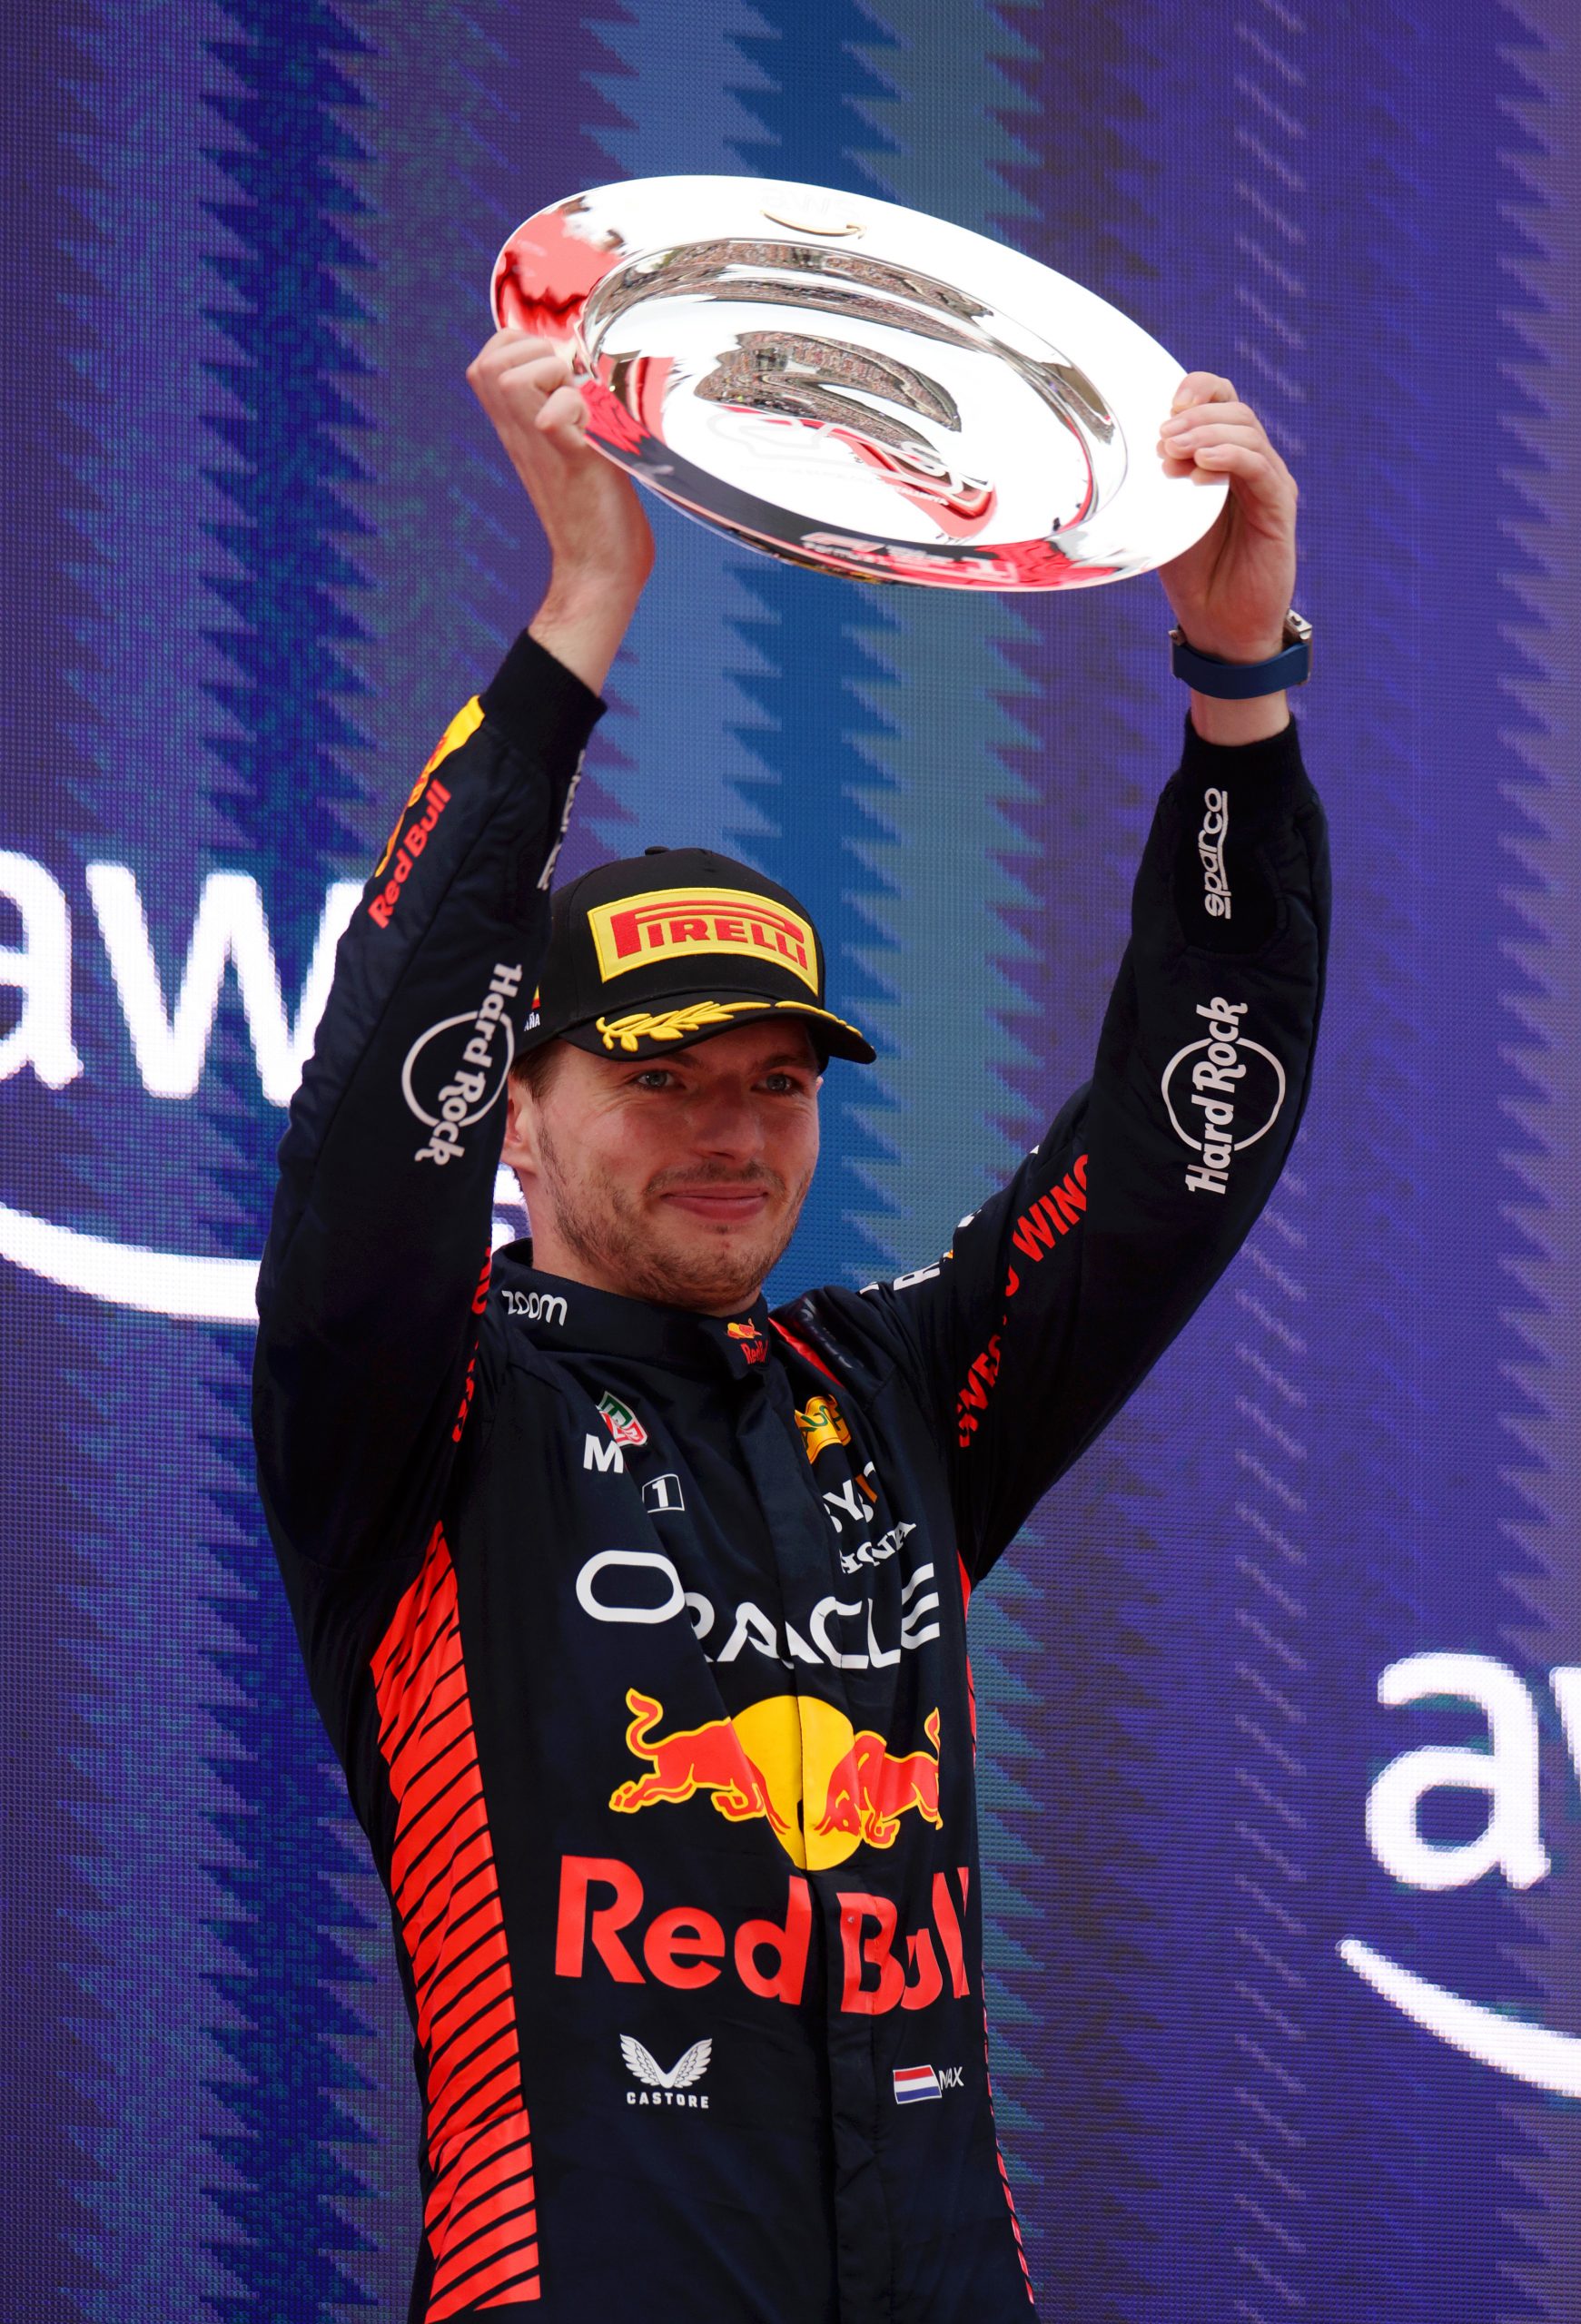 Another race, another Max Verstappen victory. (Photo: Adam Pretty | Getty Images)